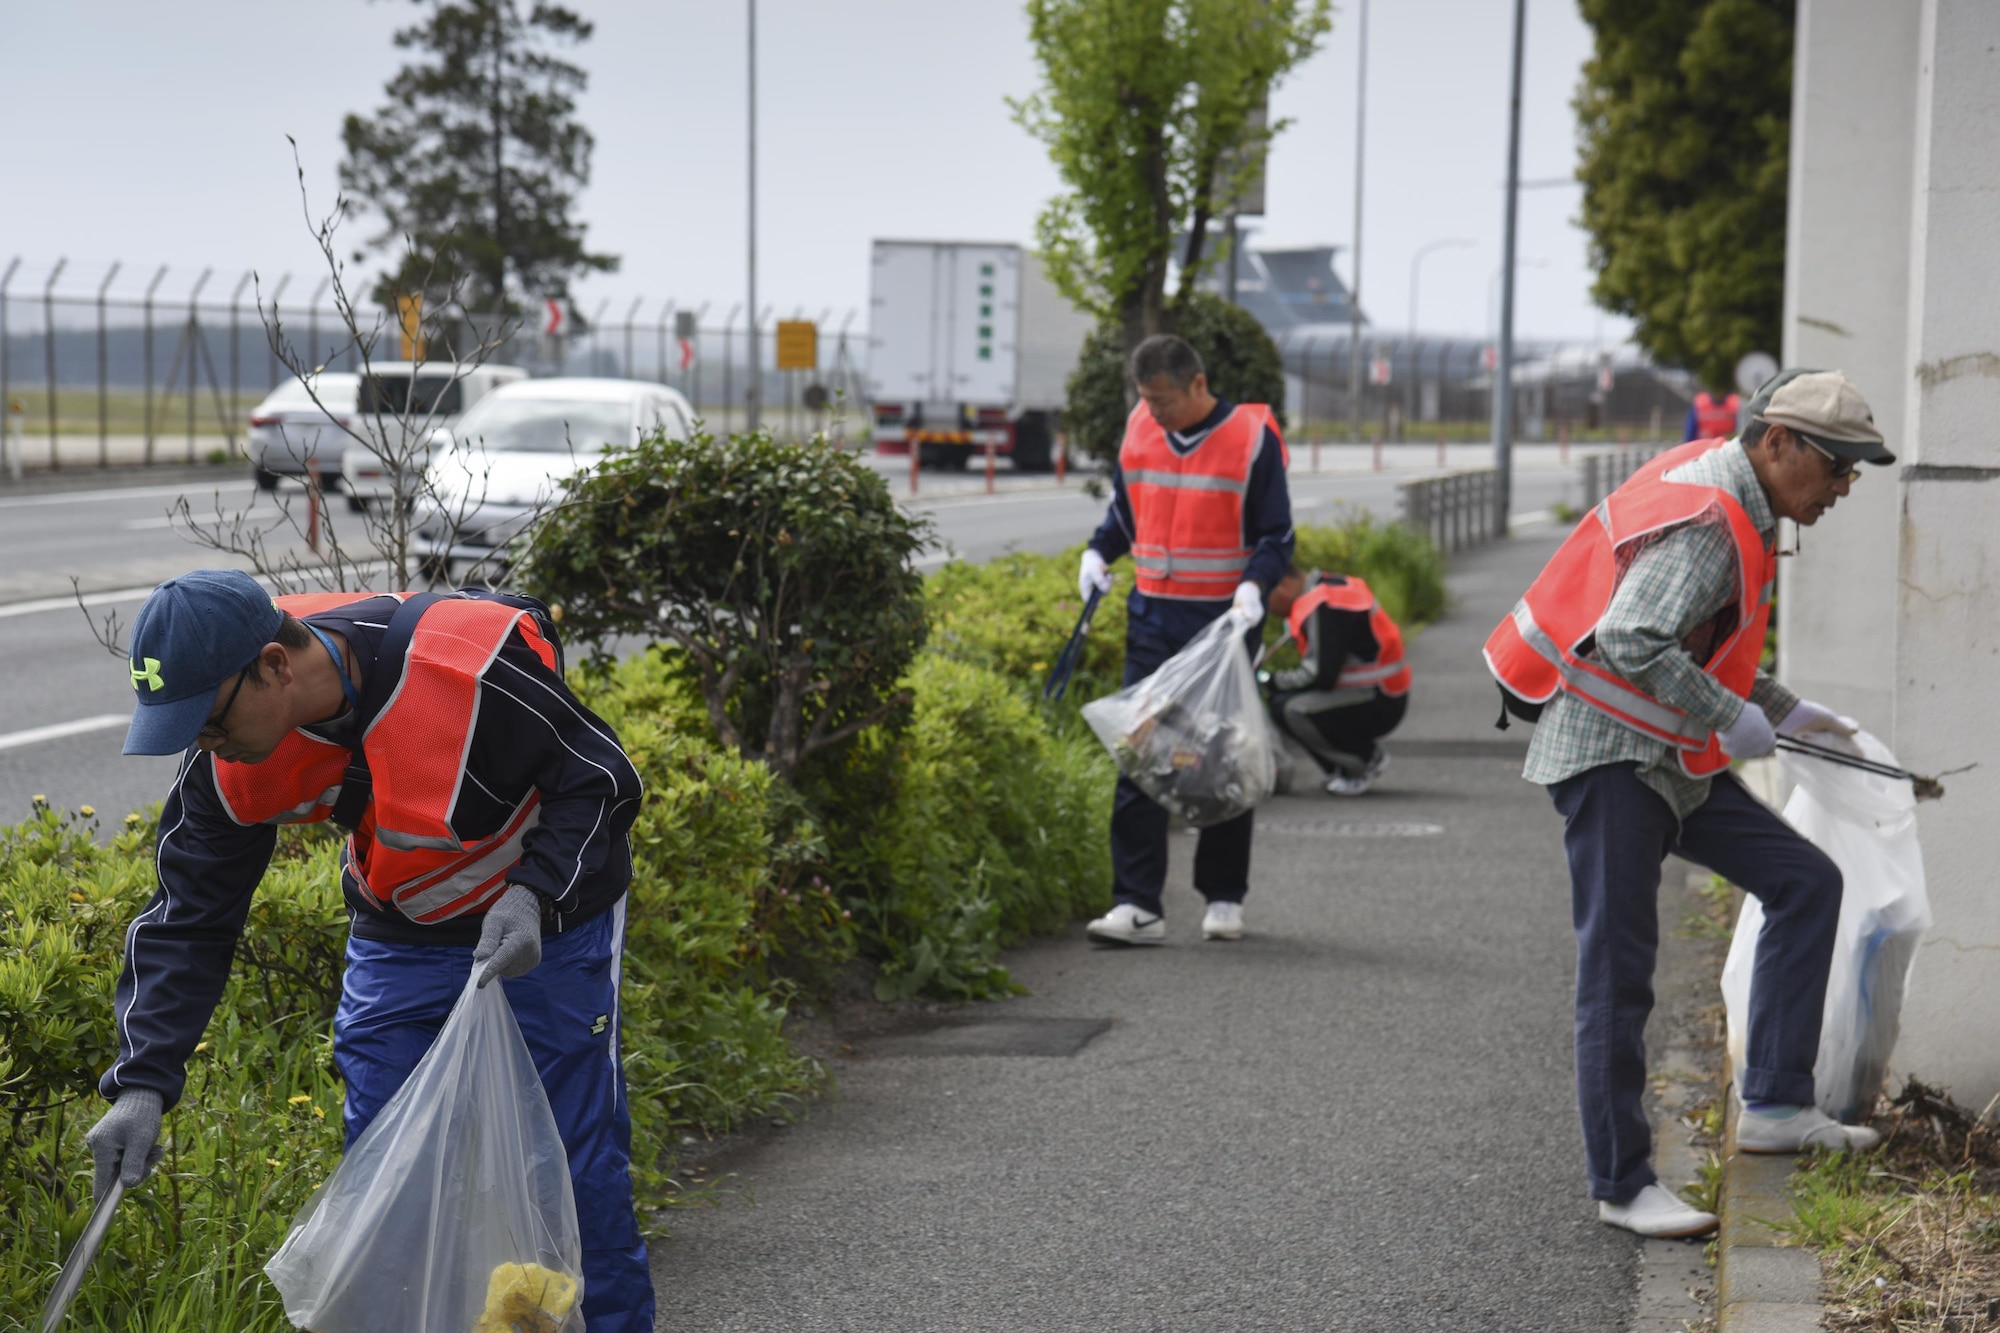 Japan Air Self-Defense Force members collect trash around the local area of Yokota Air Base during the Earth Day fence-line cleanup event April 22, 2017, at Yokota Air Base, Japan. Volunteers cleaned both inside and outside of the base. (U.S. Air Force photo by Machiko Arita)